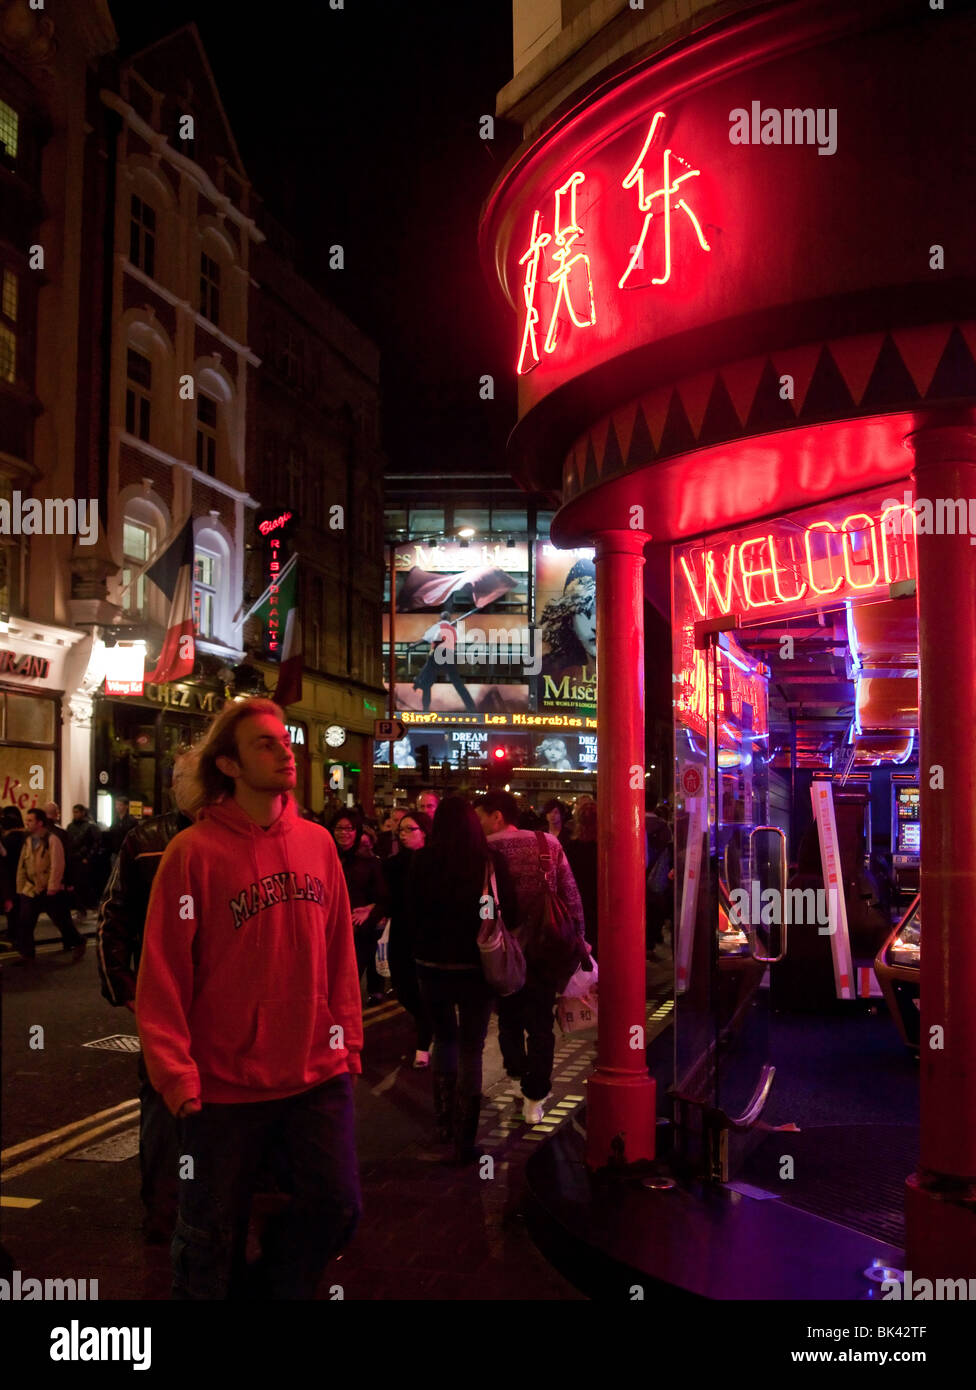 London by night, China Town, Soho, UK Banque D'Images